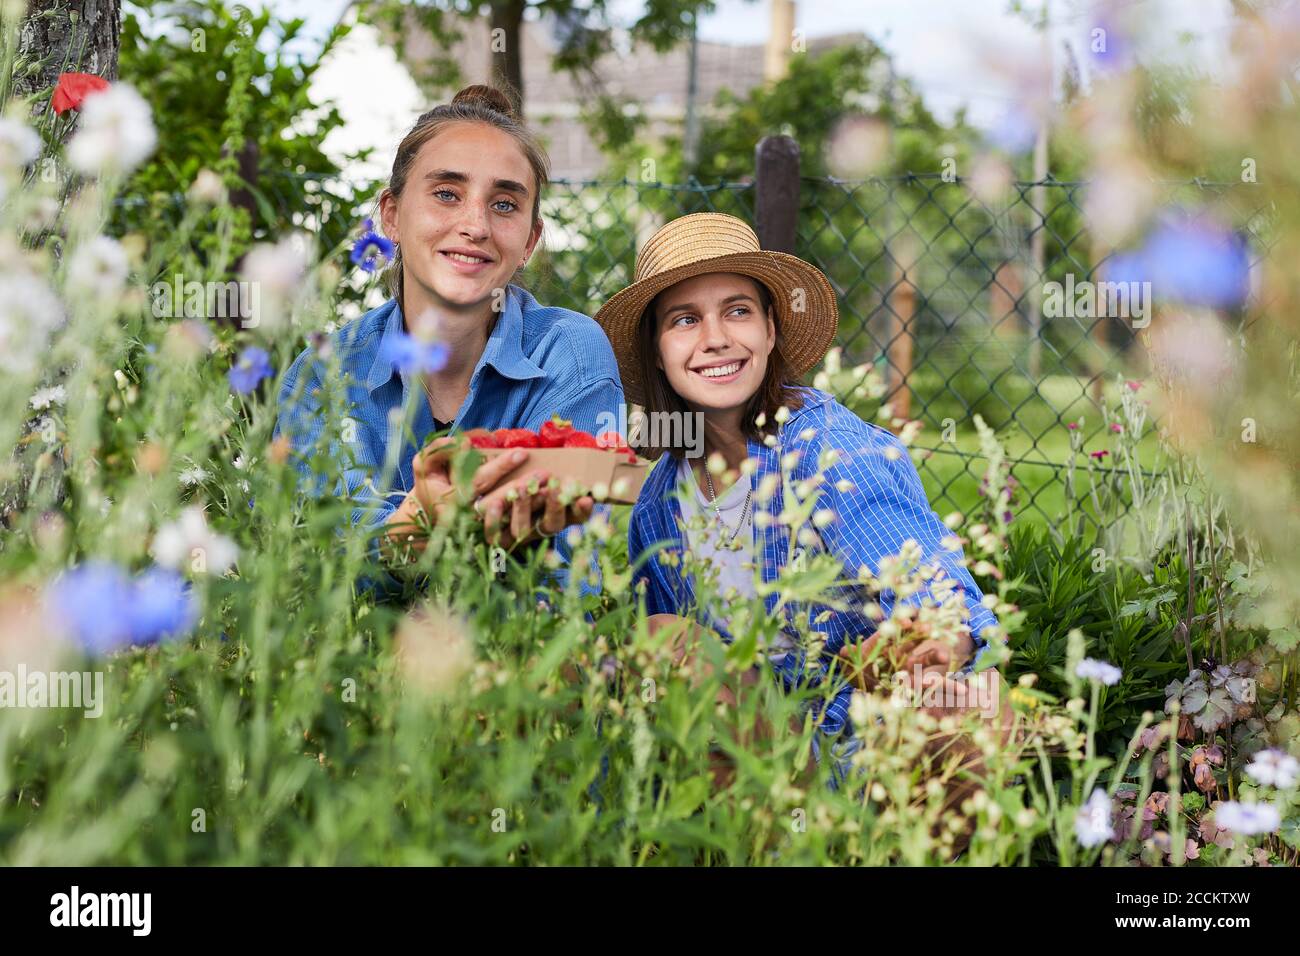 Young woman holding strawberries while working with friend in garden Stock Photo